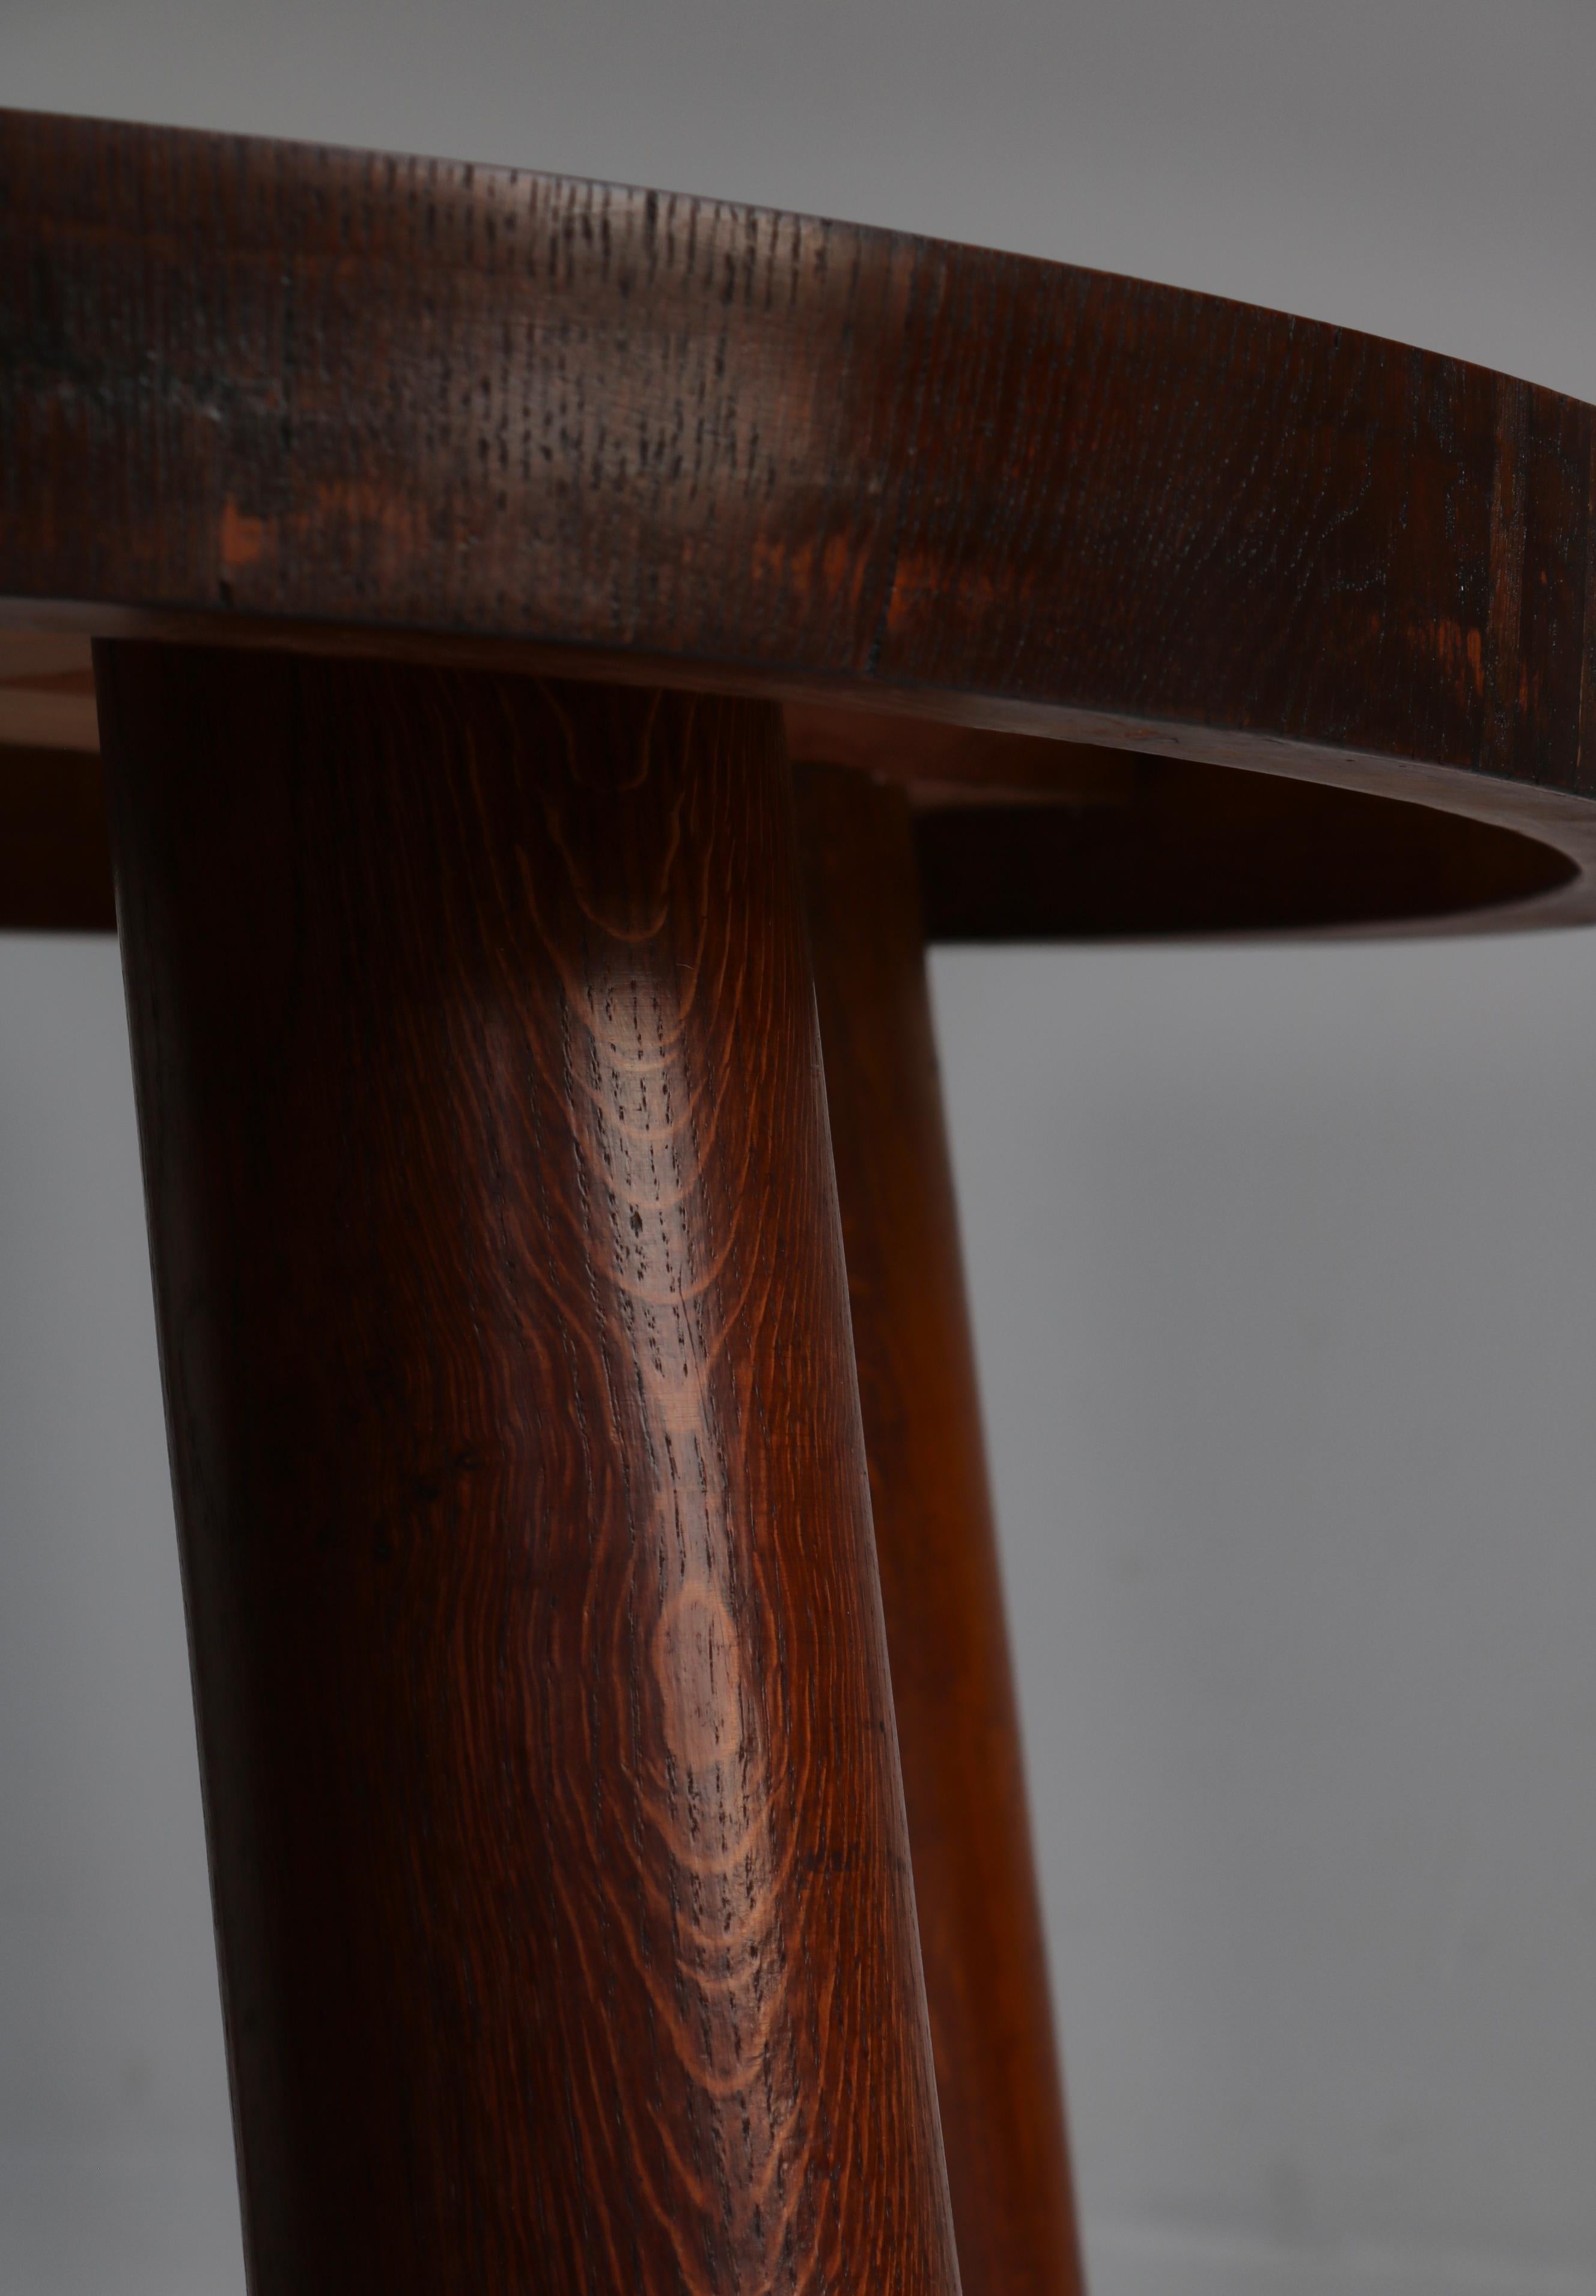 Chunky Danish Modern Side Table in Stained Oak by Otto Færge, Denmark, 1940s For Sale 6